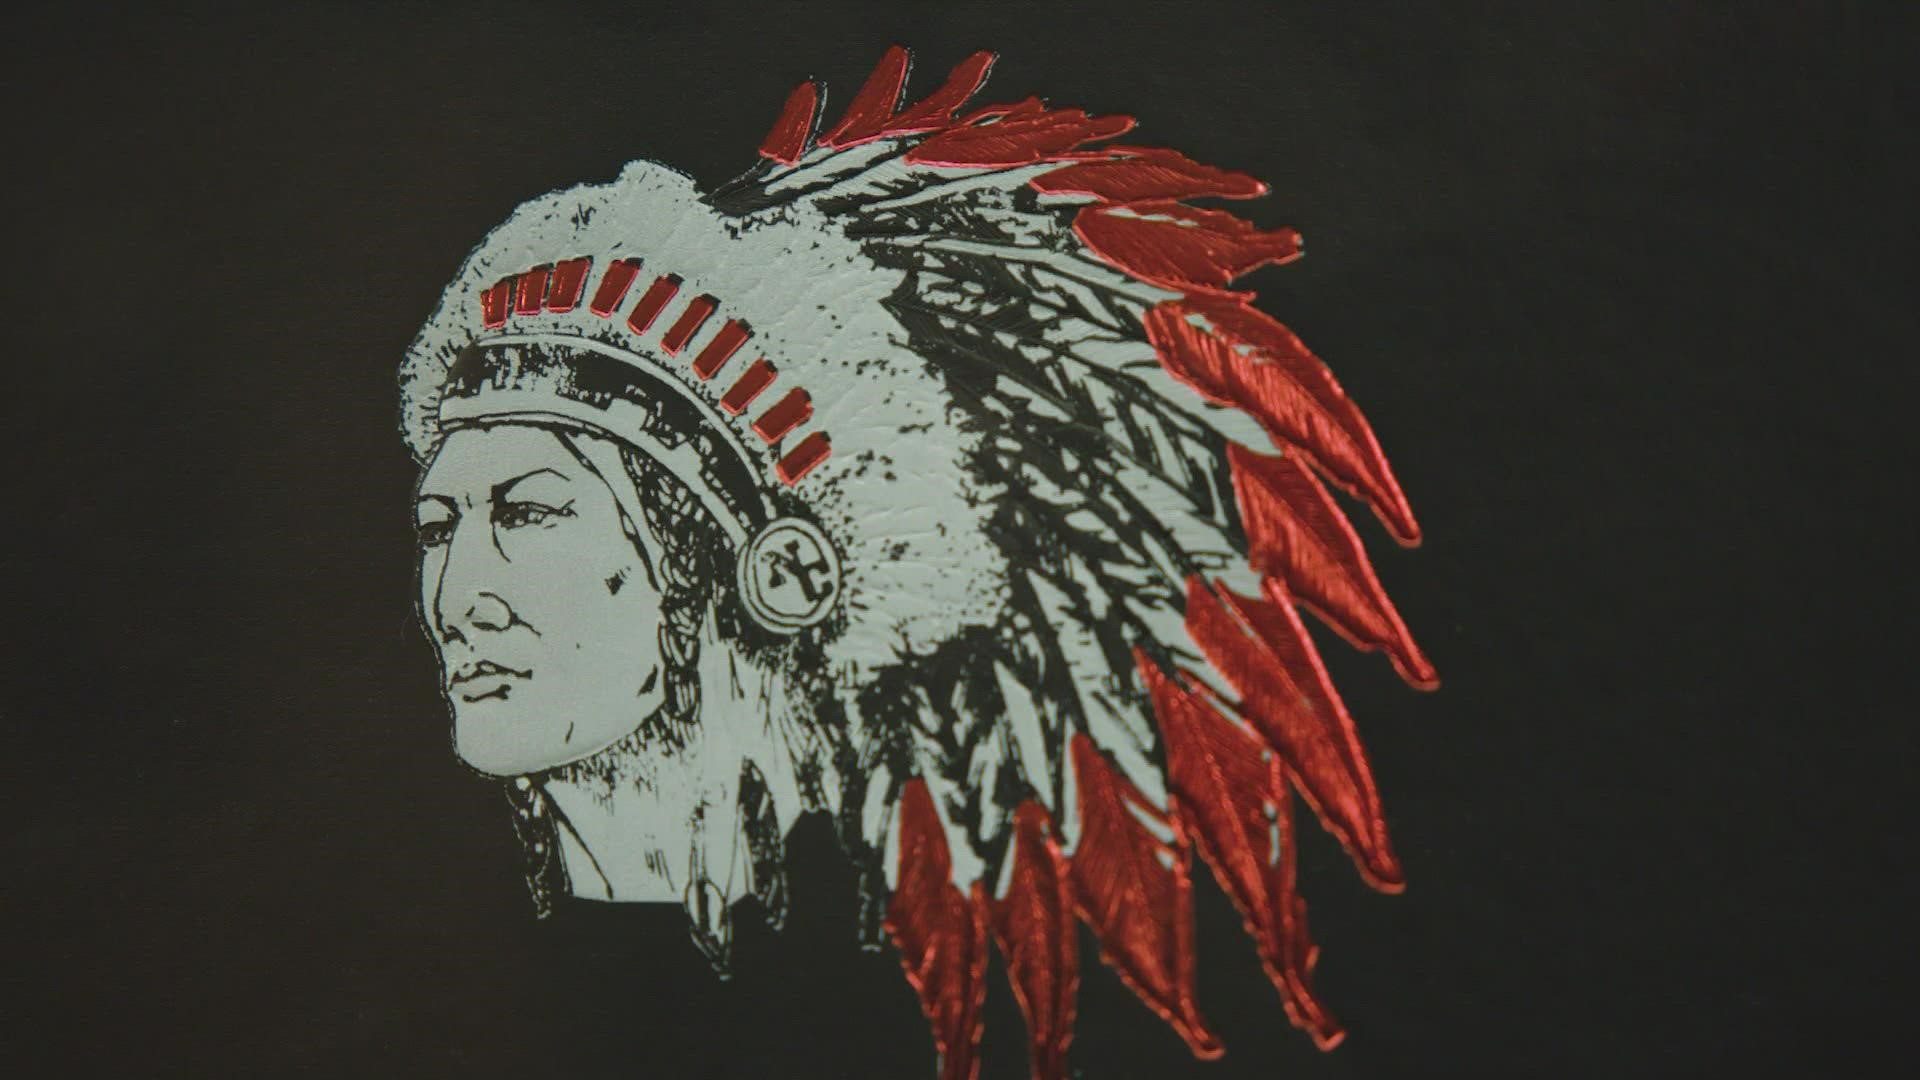 A new state law requires public schools in Washington to remove inappropriate Native mascots, symbols, images and logos.